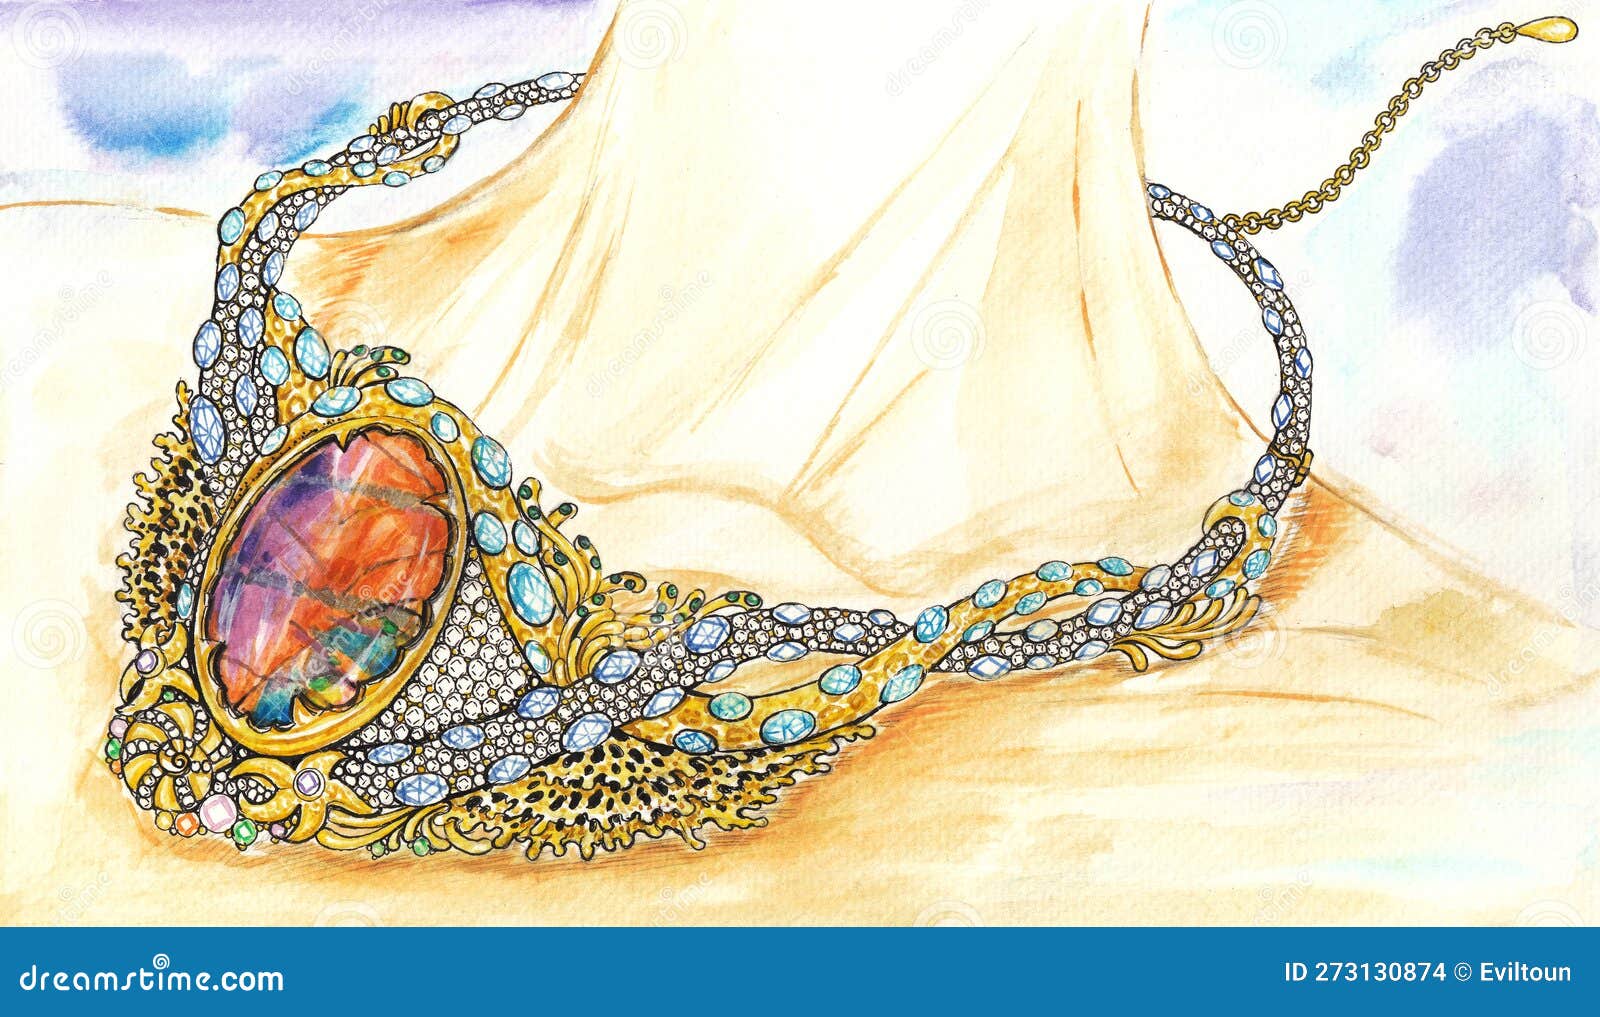 How to sketch your jewelry designs - Candie Cooper